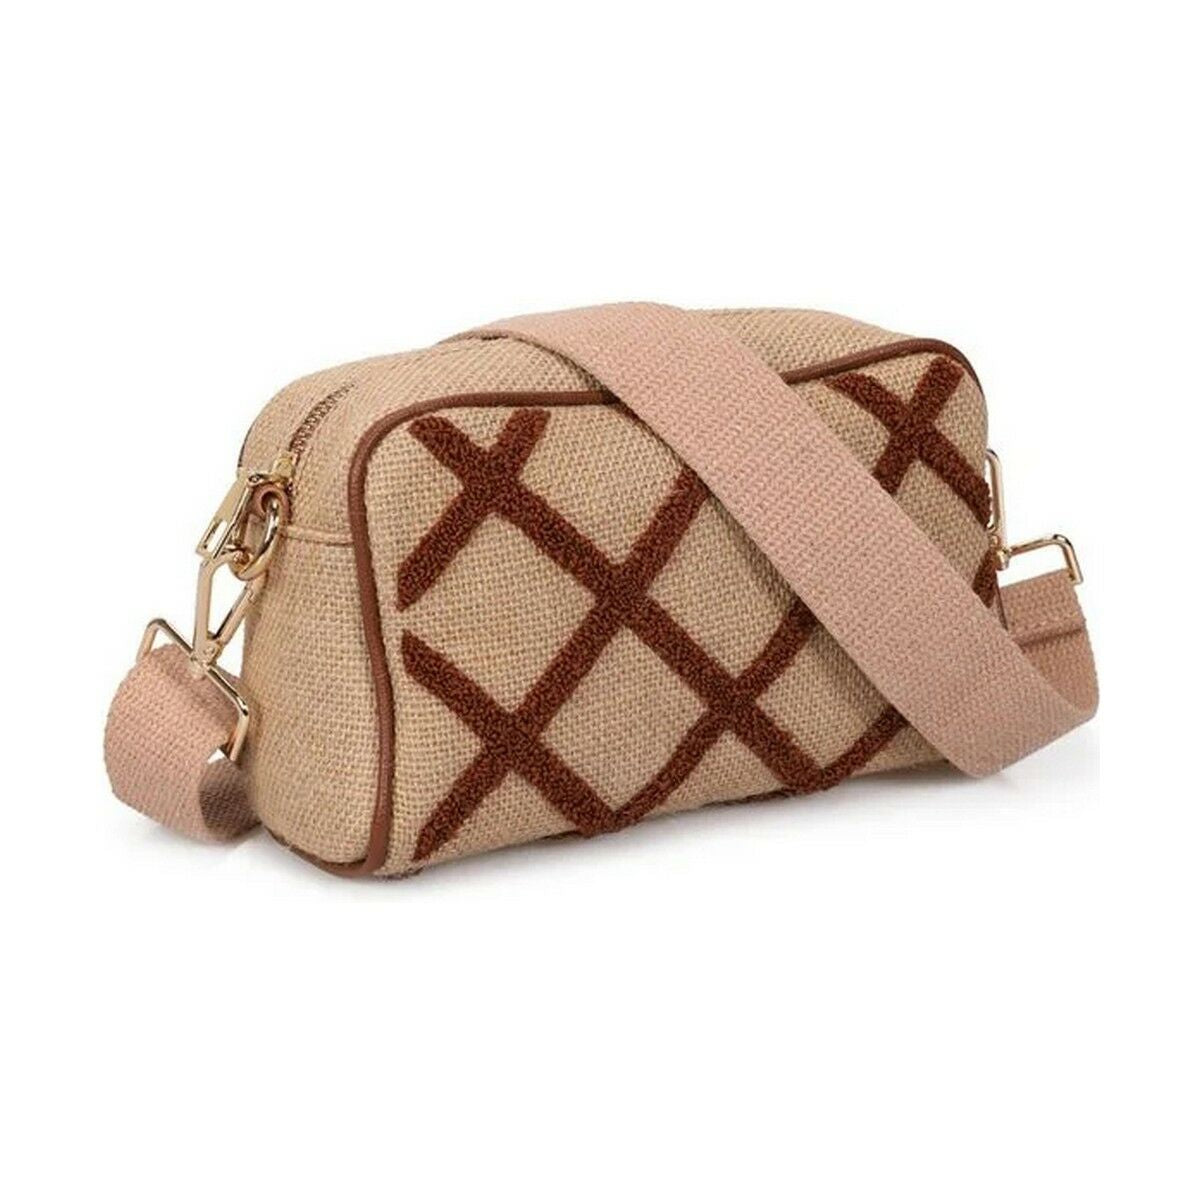 Laura Ashley LENORE-QUILTED-TAN Brown (23 x 15 x 9 cm)